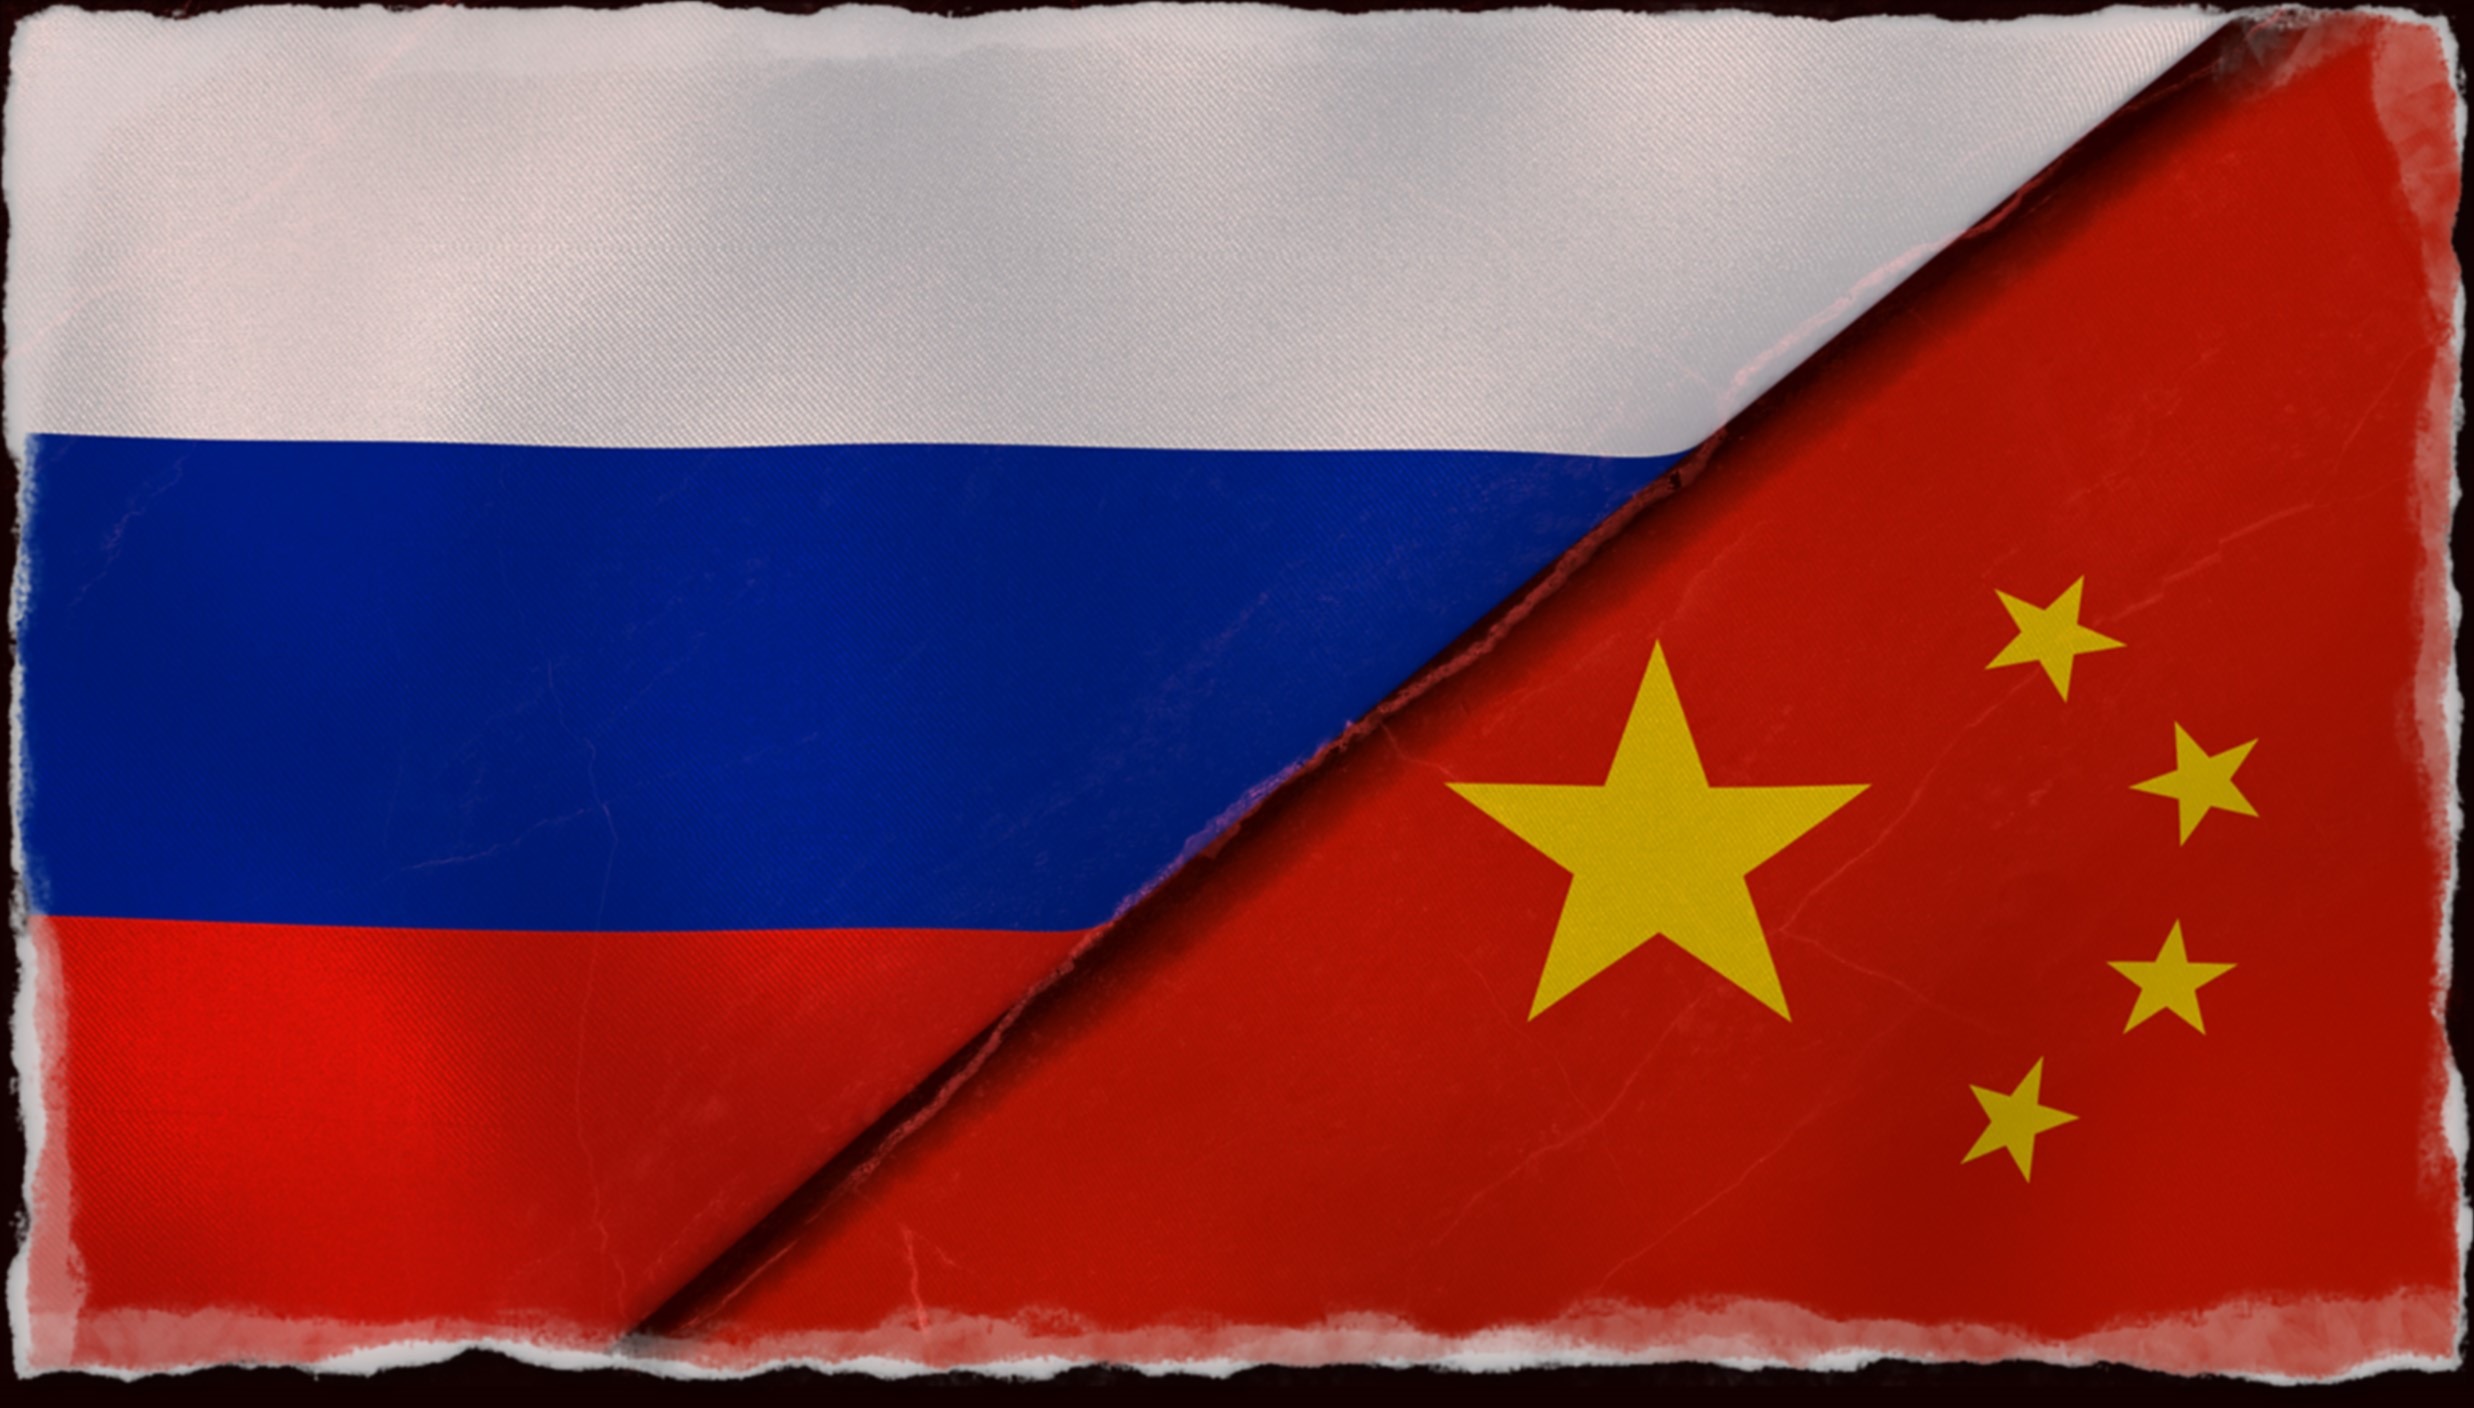 Russia-China Relations: Deepening Cooperation and Avoiding An Alliance